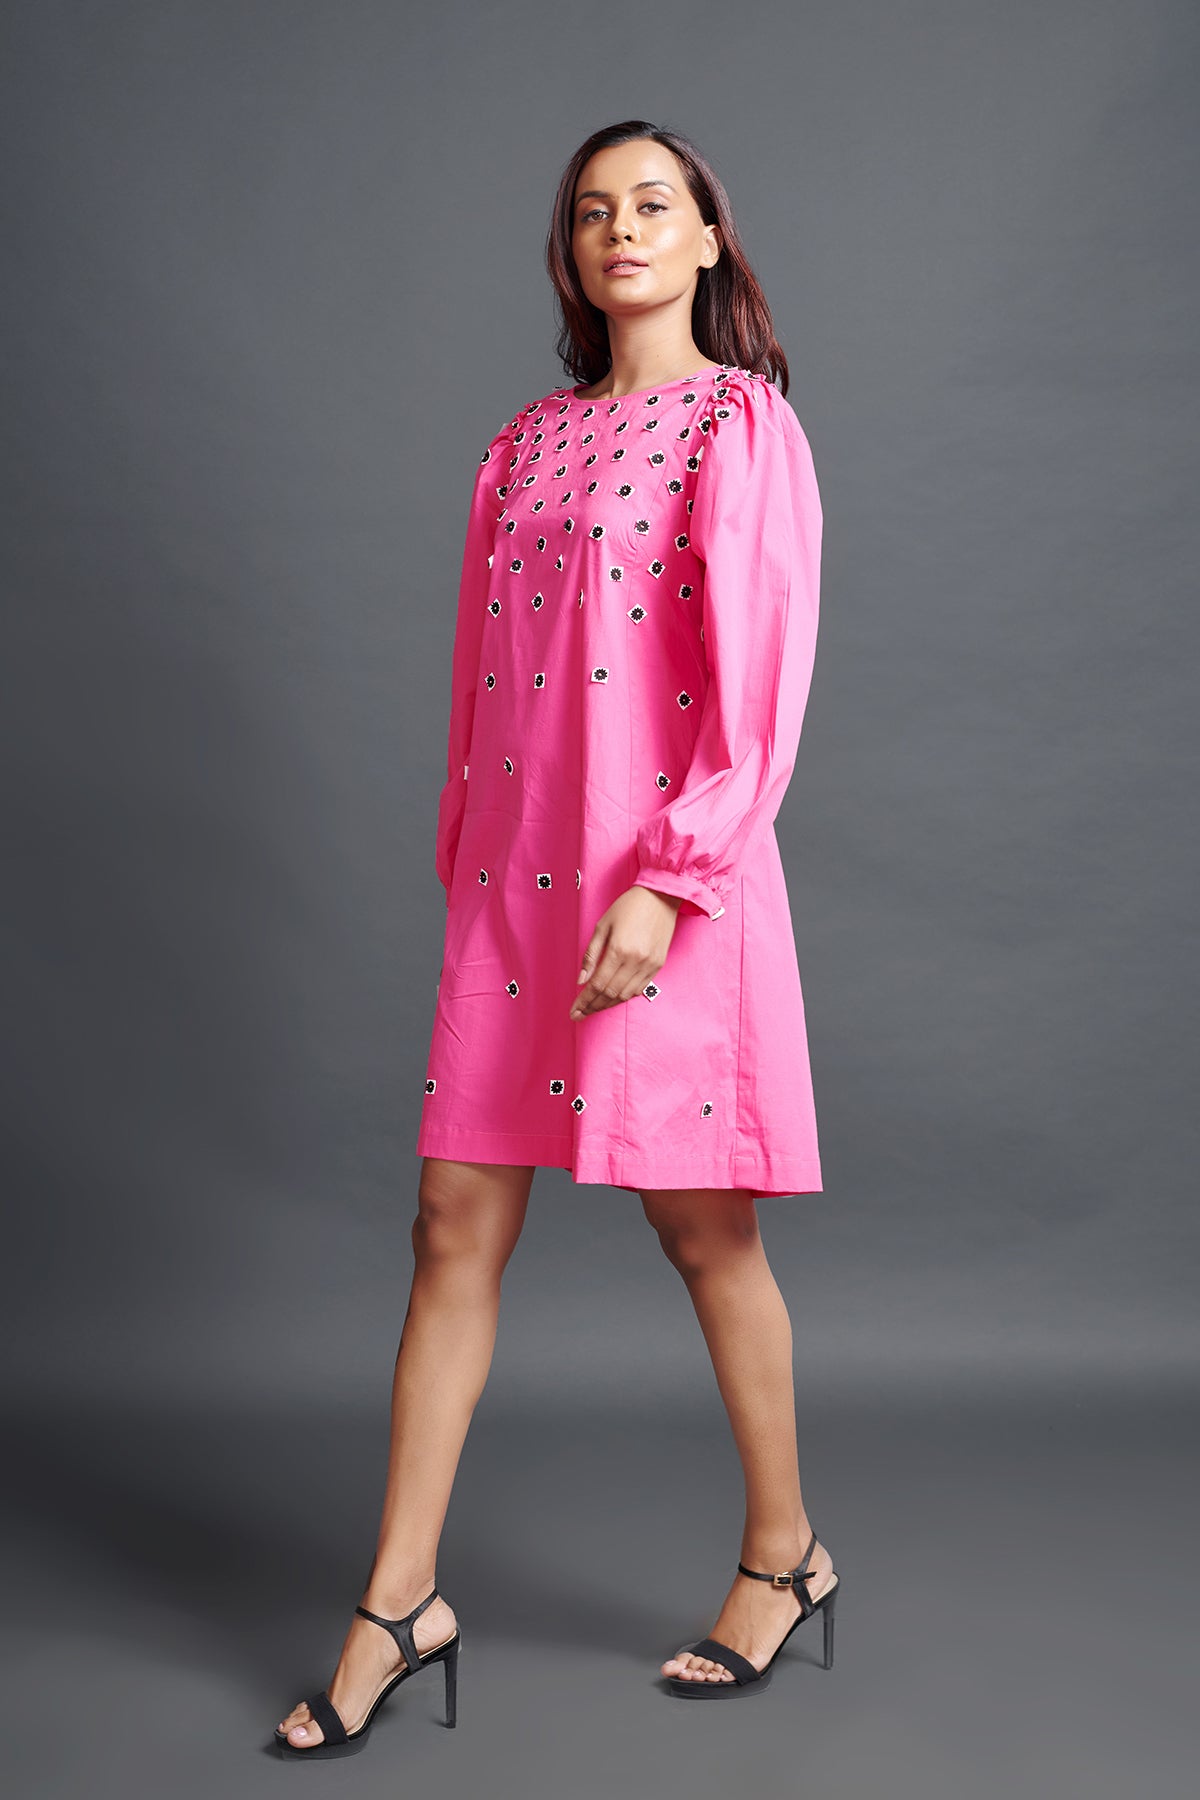 Image of PINK A-LINE DRESS IN COTTON BASE WITH EMBROIDERY AND BACK KNOT DETAIL. From savoirfashions.com